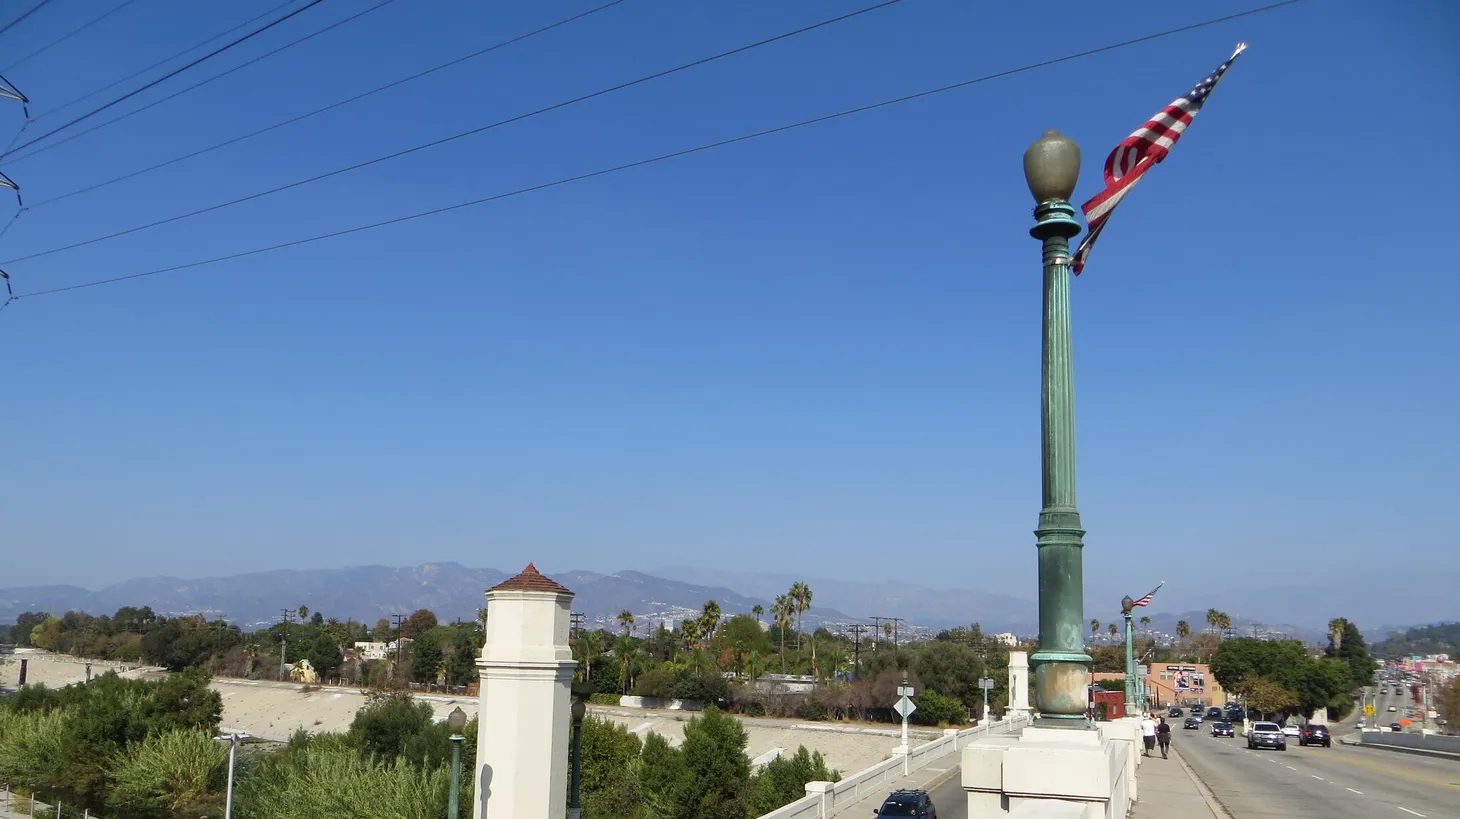 LA is trying to protect bronze street lamps like this on the Glendale-Hyperion Bridge from thieves.